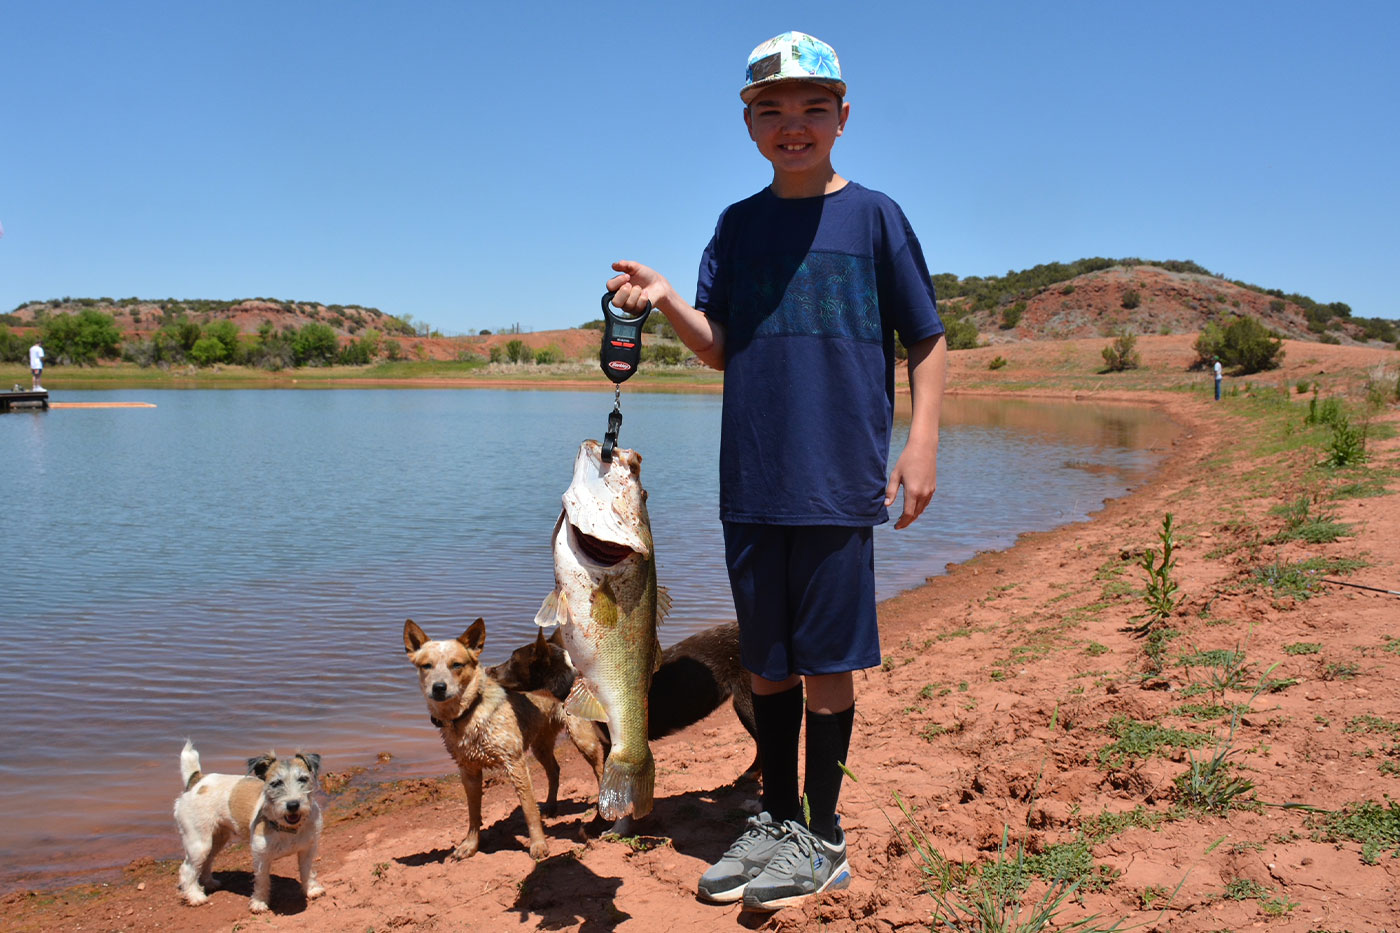 Jett just caught a fish. He is holding it while standing next to a pond alongside his dogs. 